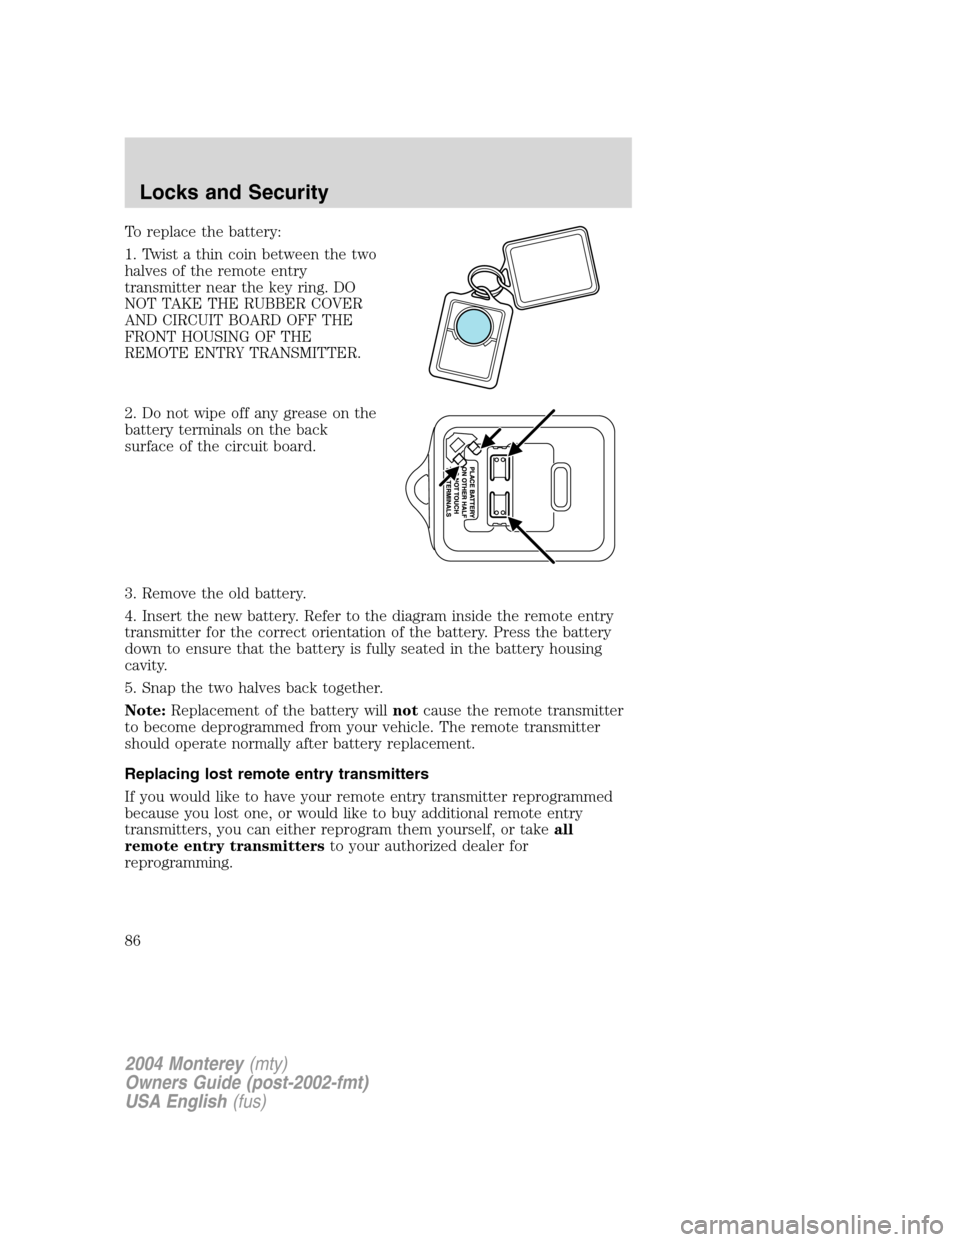 Mercury Monterey 2004  Owners Manuals To replace the battery:
1. Twist a thin coin between the two
halves of the remote entry
transmitter near the key ring. DO
NOT TAKE THE RUBBER COVER
AND CIRCUIT BOARD OFF THE
FRONT HOUSING OF THE
REMOT